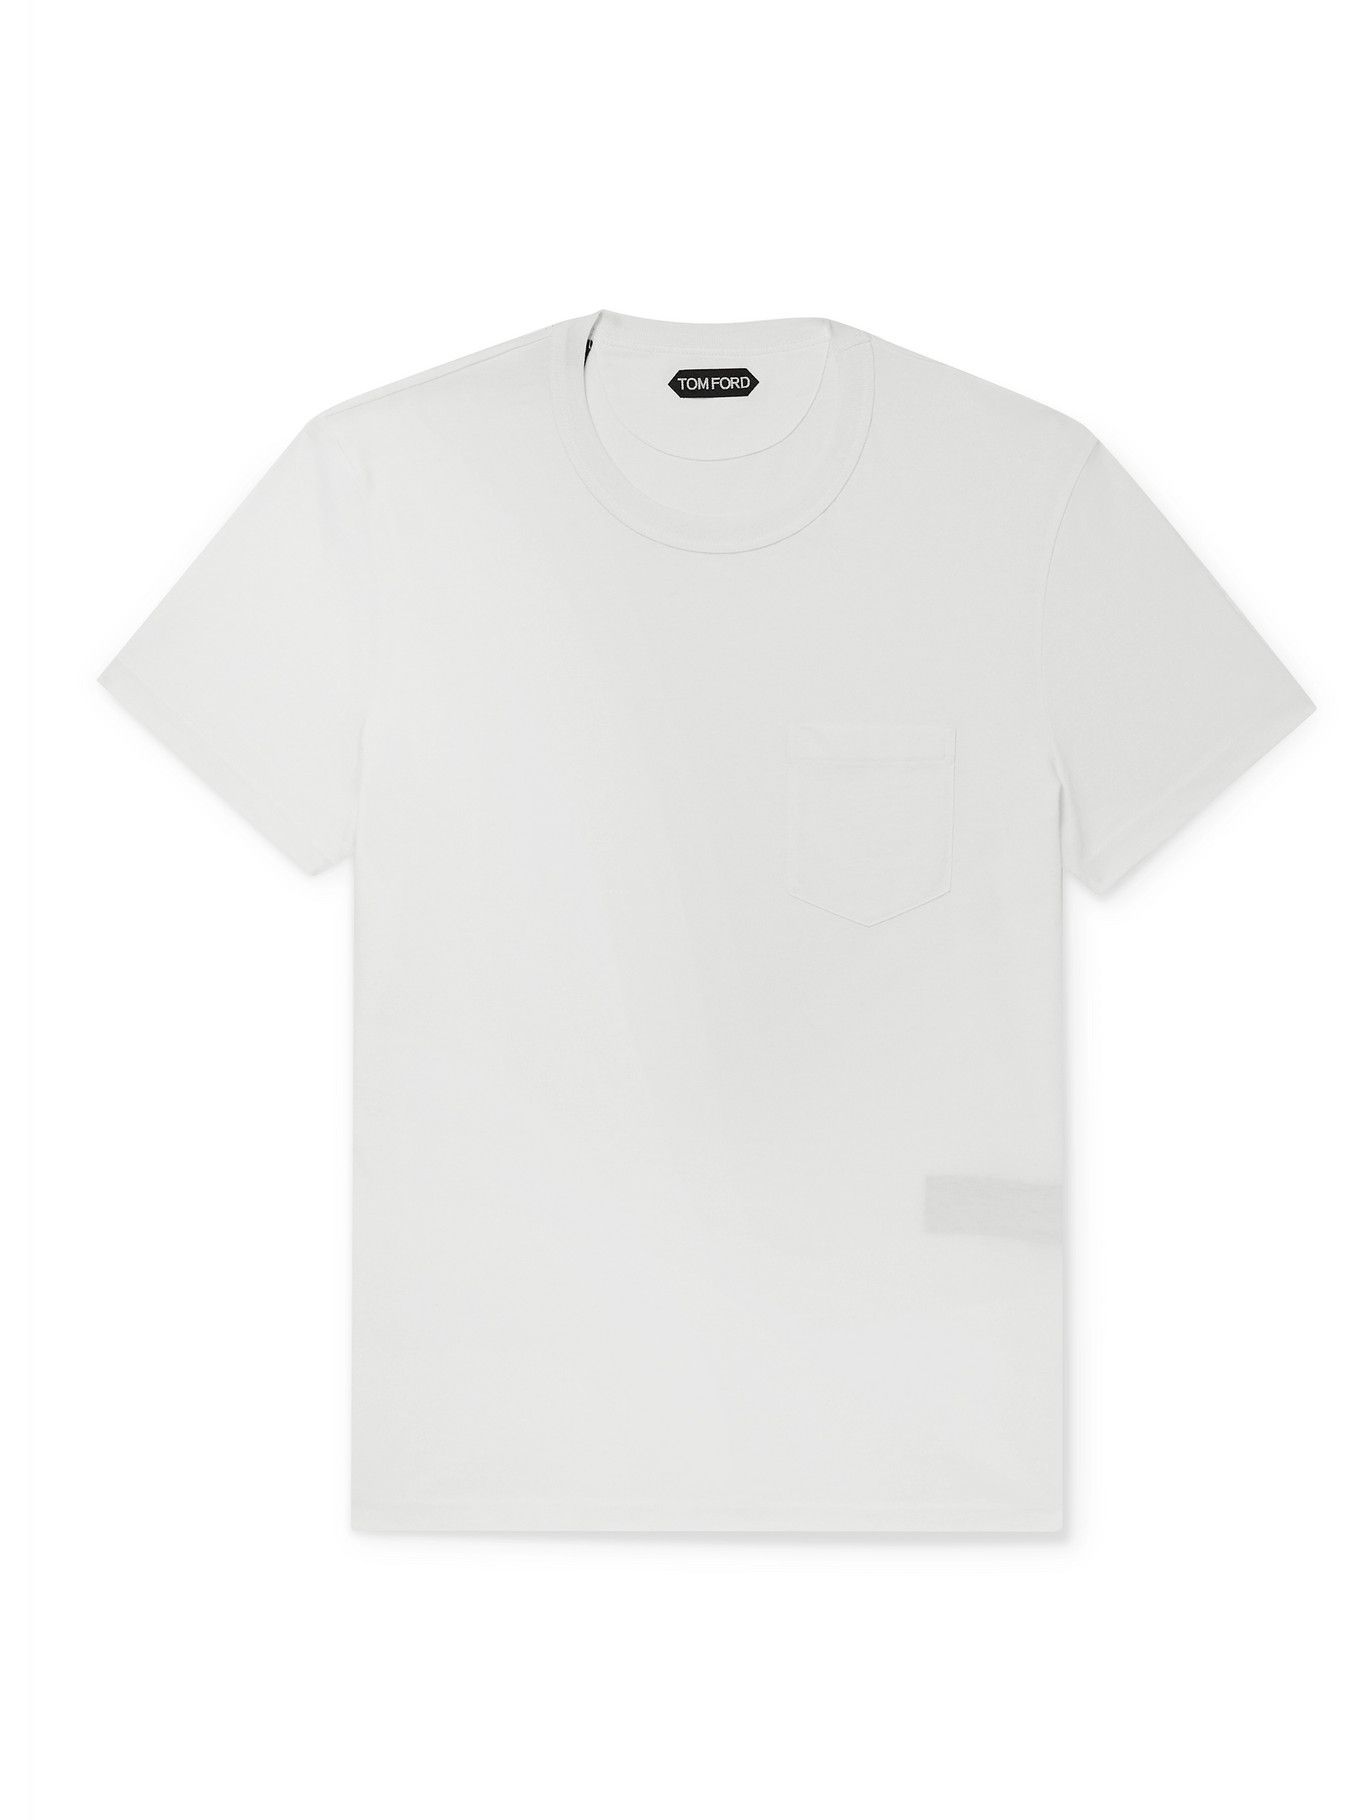 TOM FORD - Cotton-Jersey T-Shirt - White TOM FORD